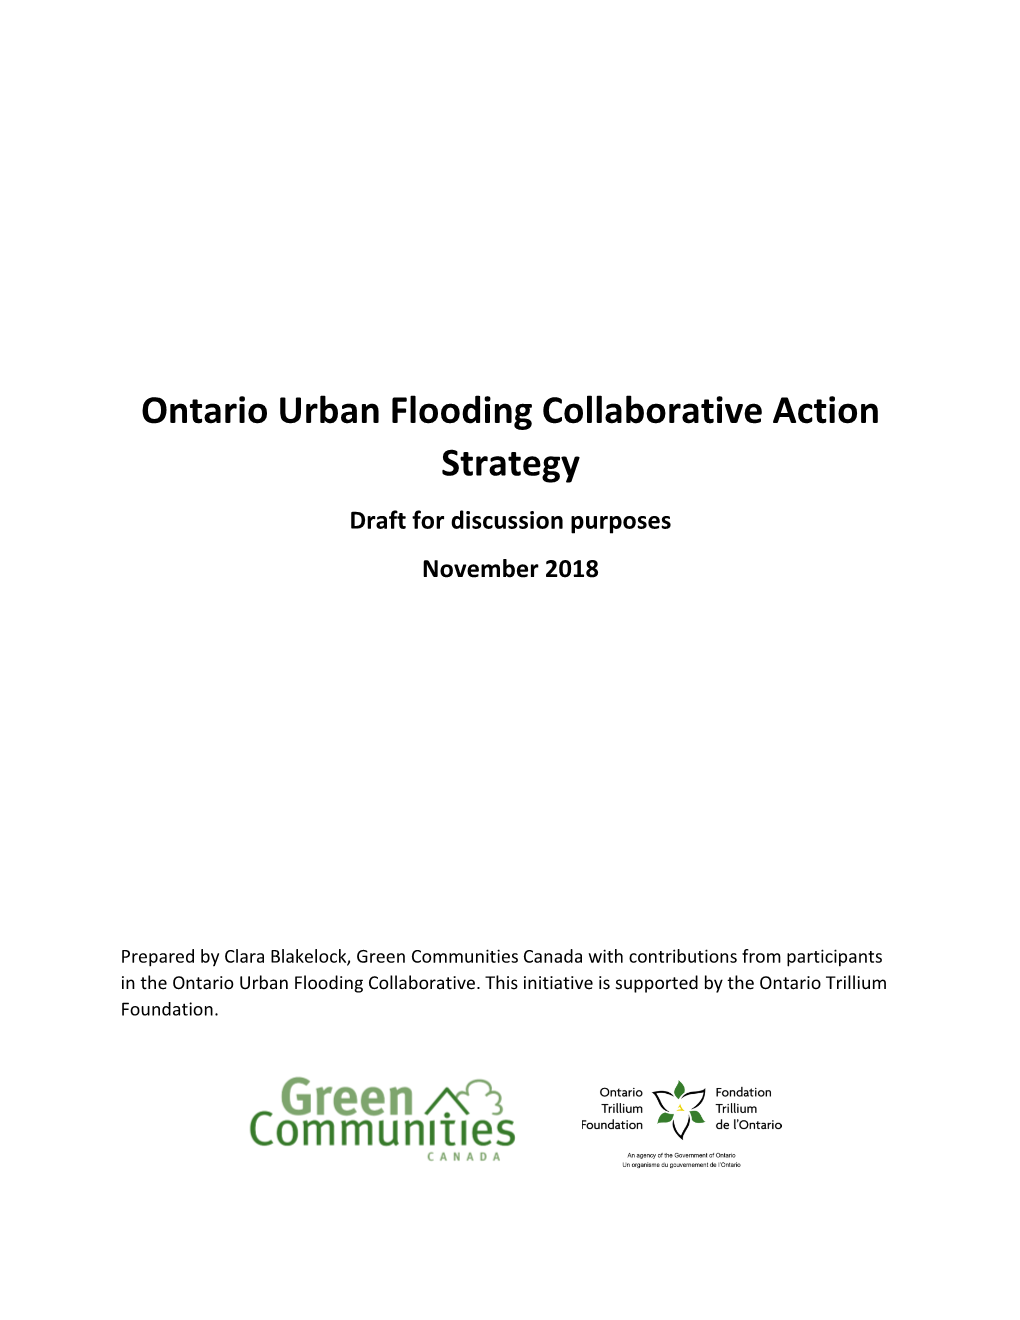 Ontario Urban Flooding Collaborative Action Strategy Draft for Discussion Purposes November 2018